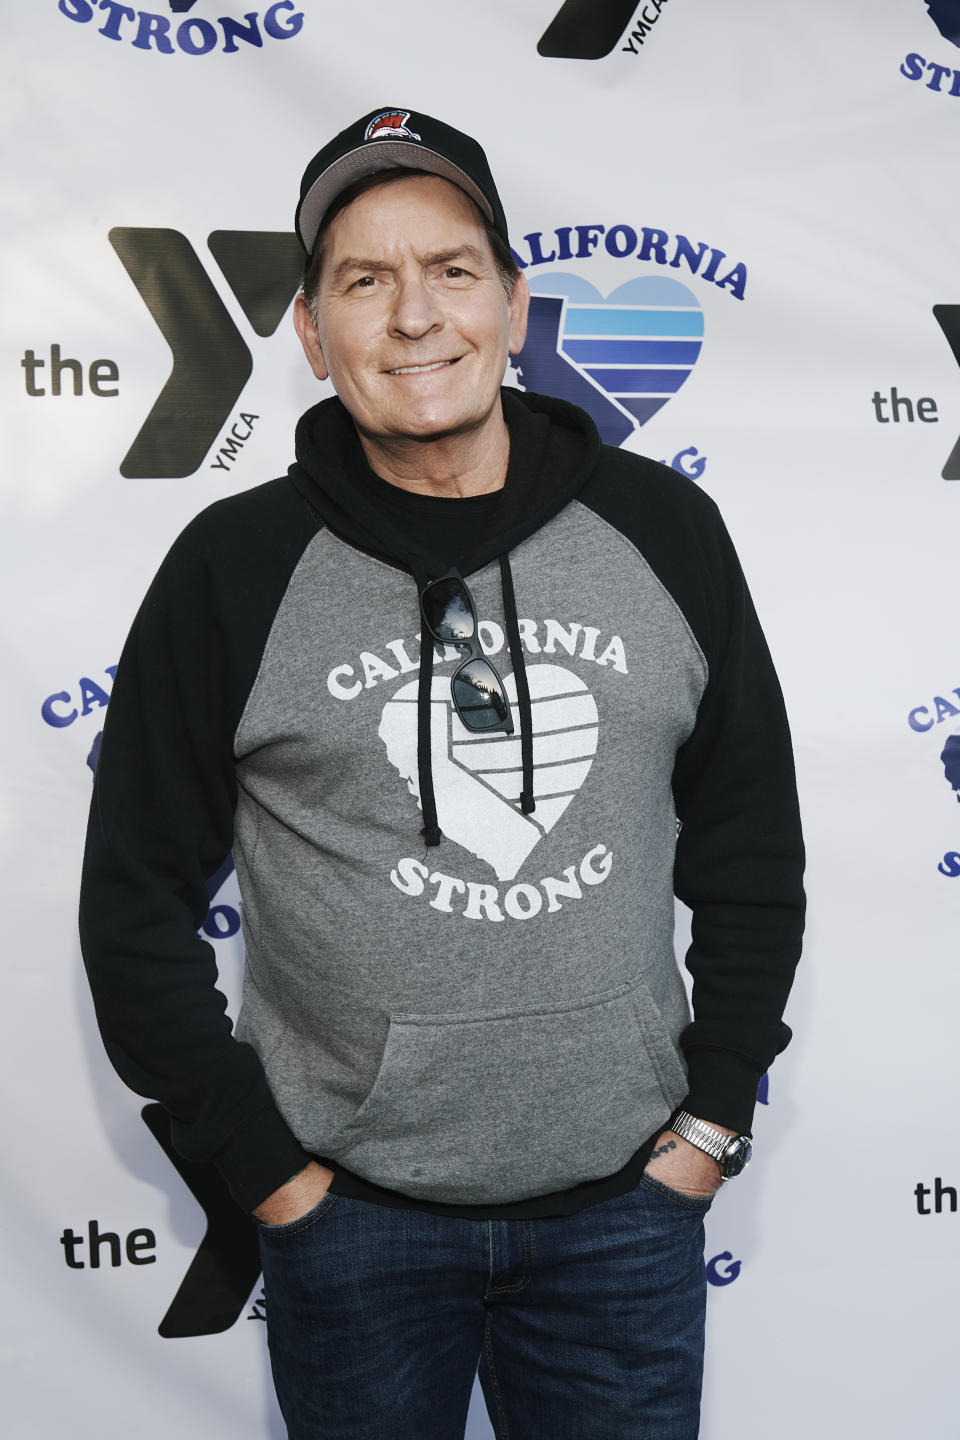 Charlie Sheen attends the premiere of California Strong Drive In Night at Calimigos on May 22, 2021 (Photo by Michael Buckner/Penske Media via Getty Images)